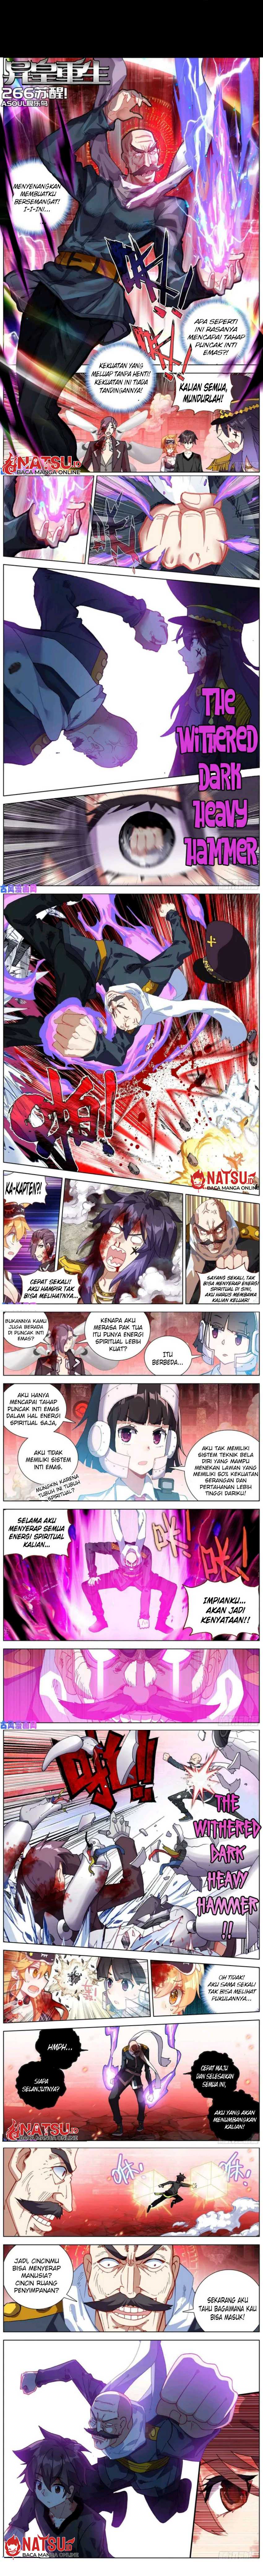 Different Kings Chapter 265 - 27